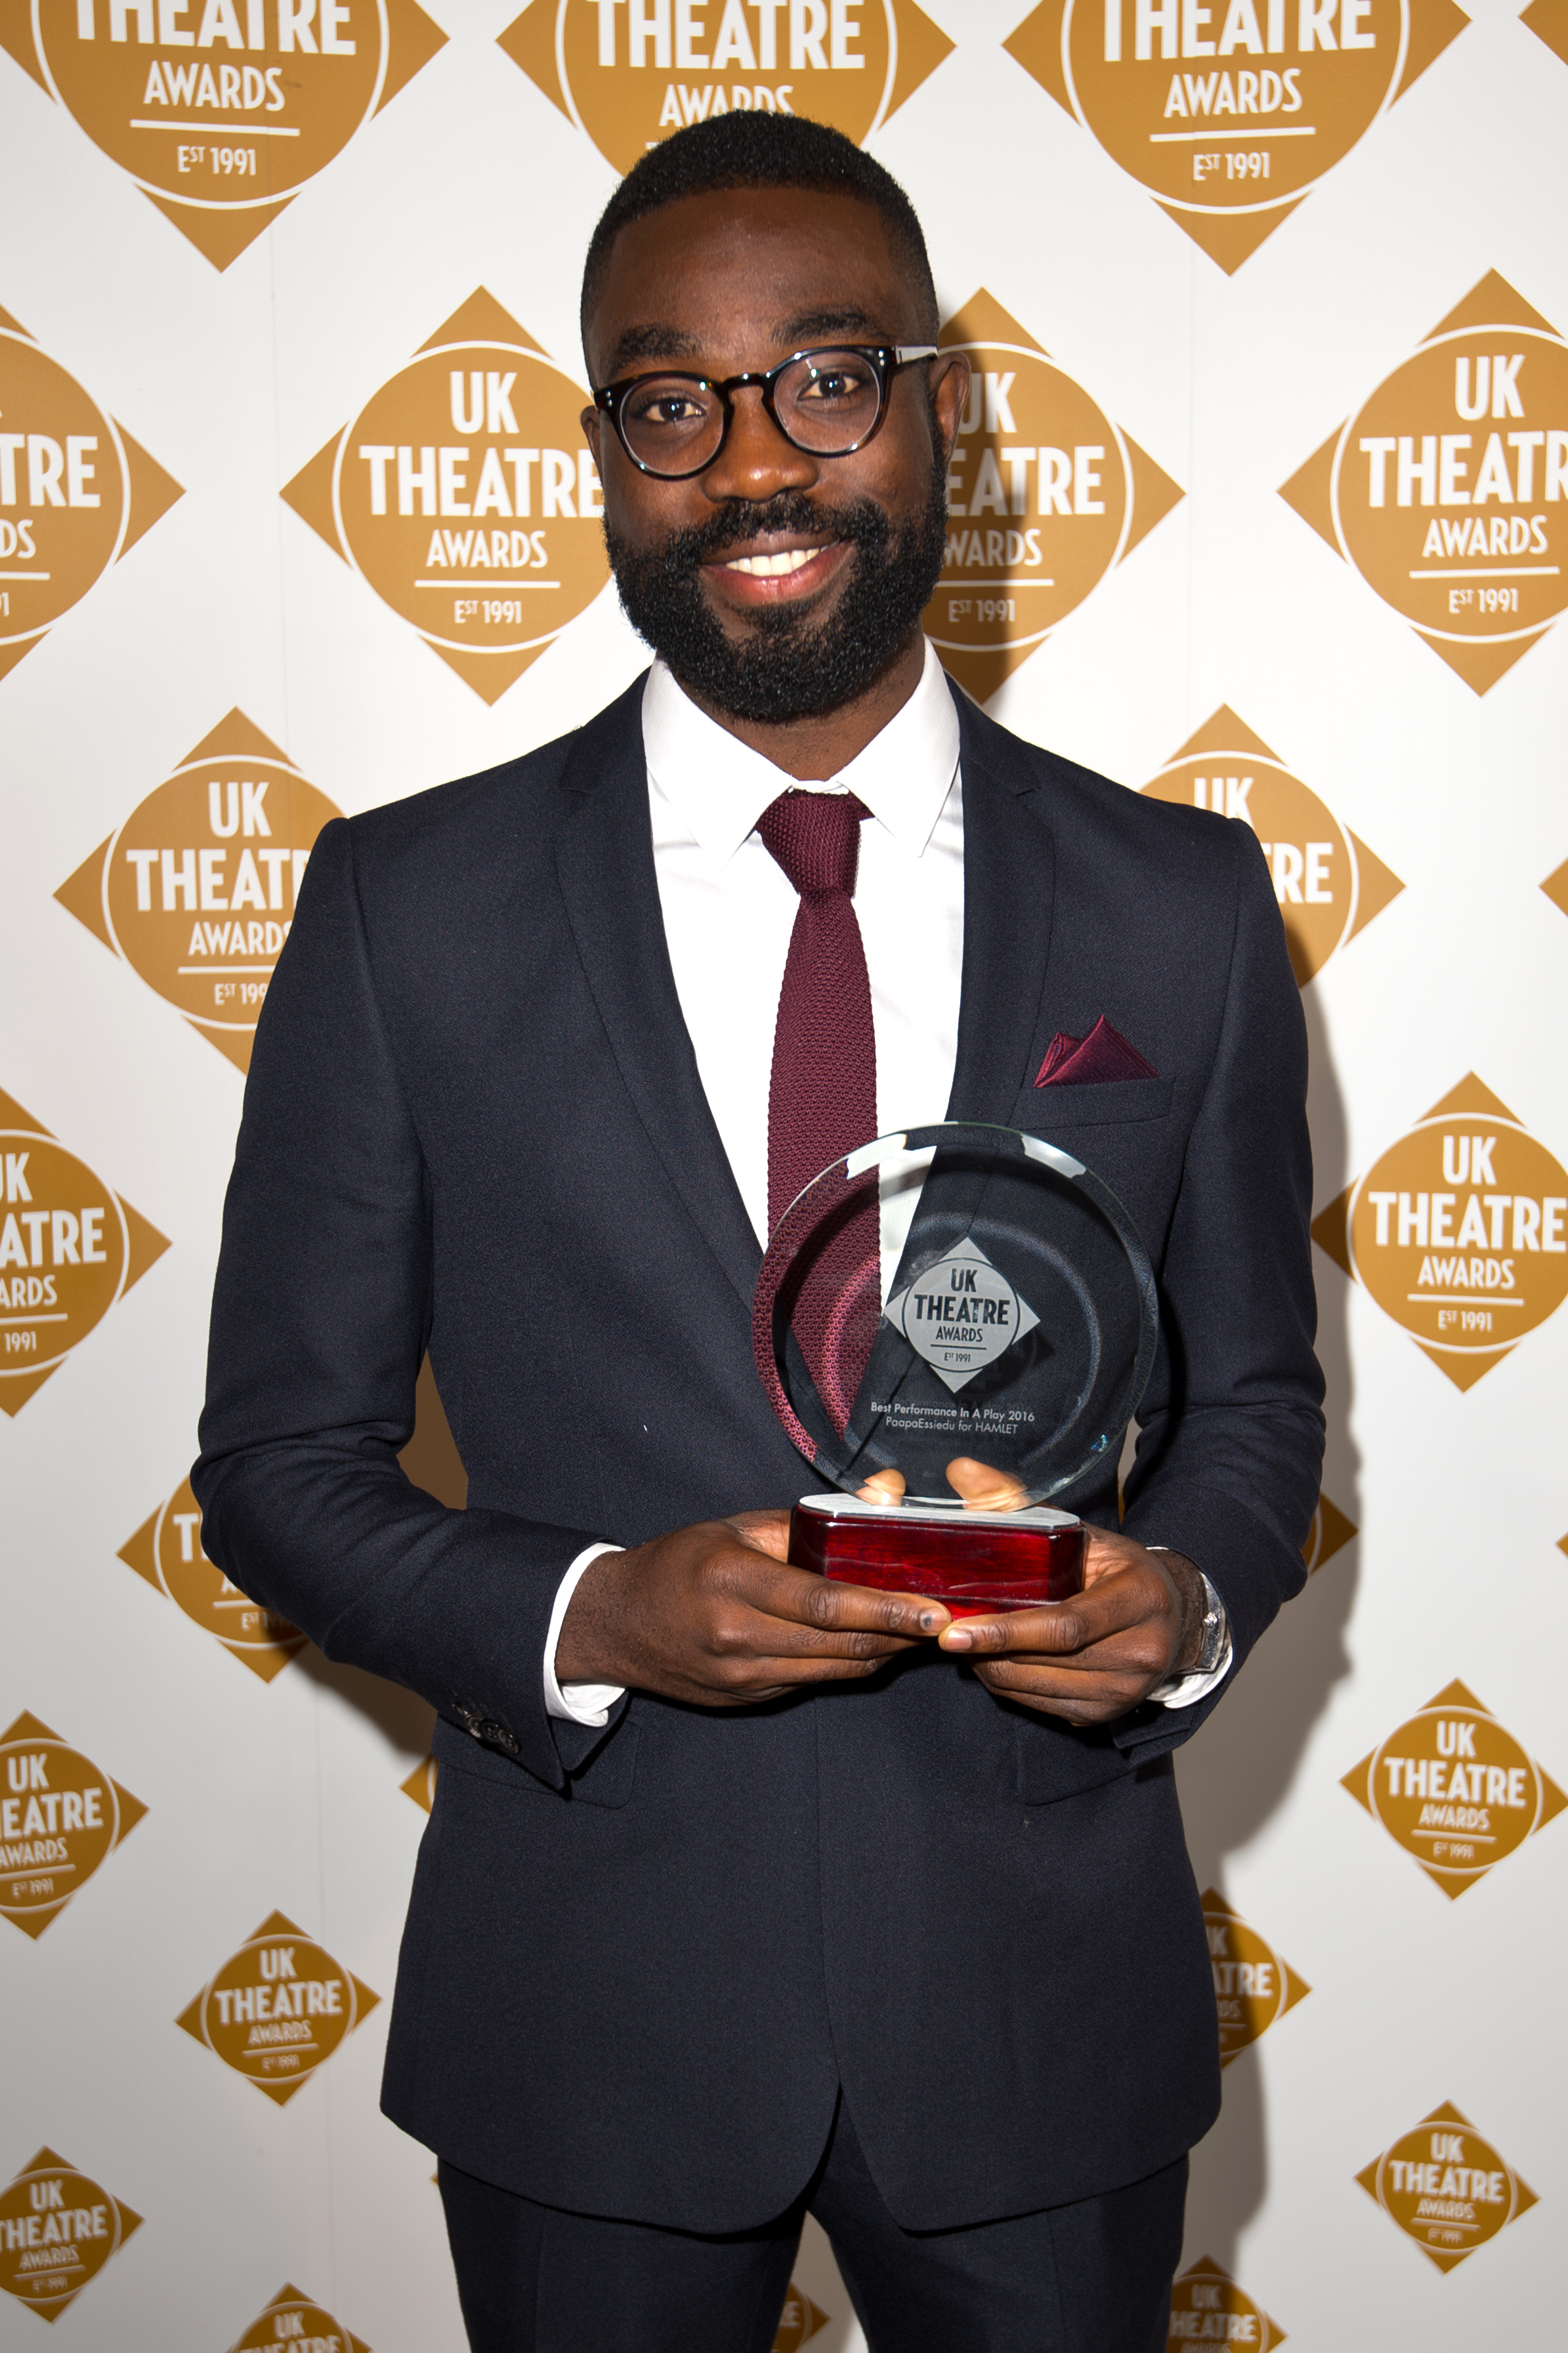 Paapa Essiedu poses with his award for best performance in a play for Hamlet at the UK Theatre Awards at The Guildhall on October 9, 2016 in London, England | Source: Getty Images